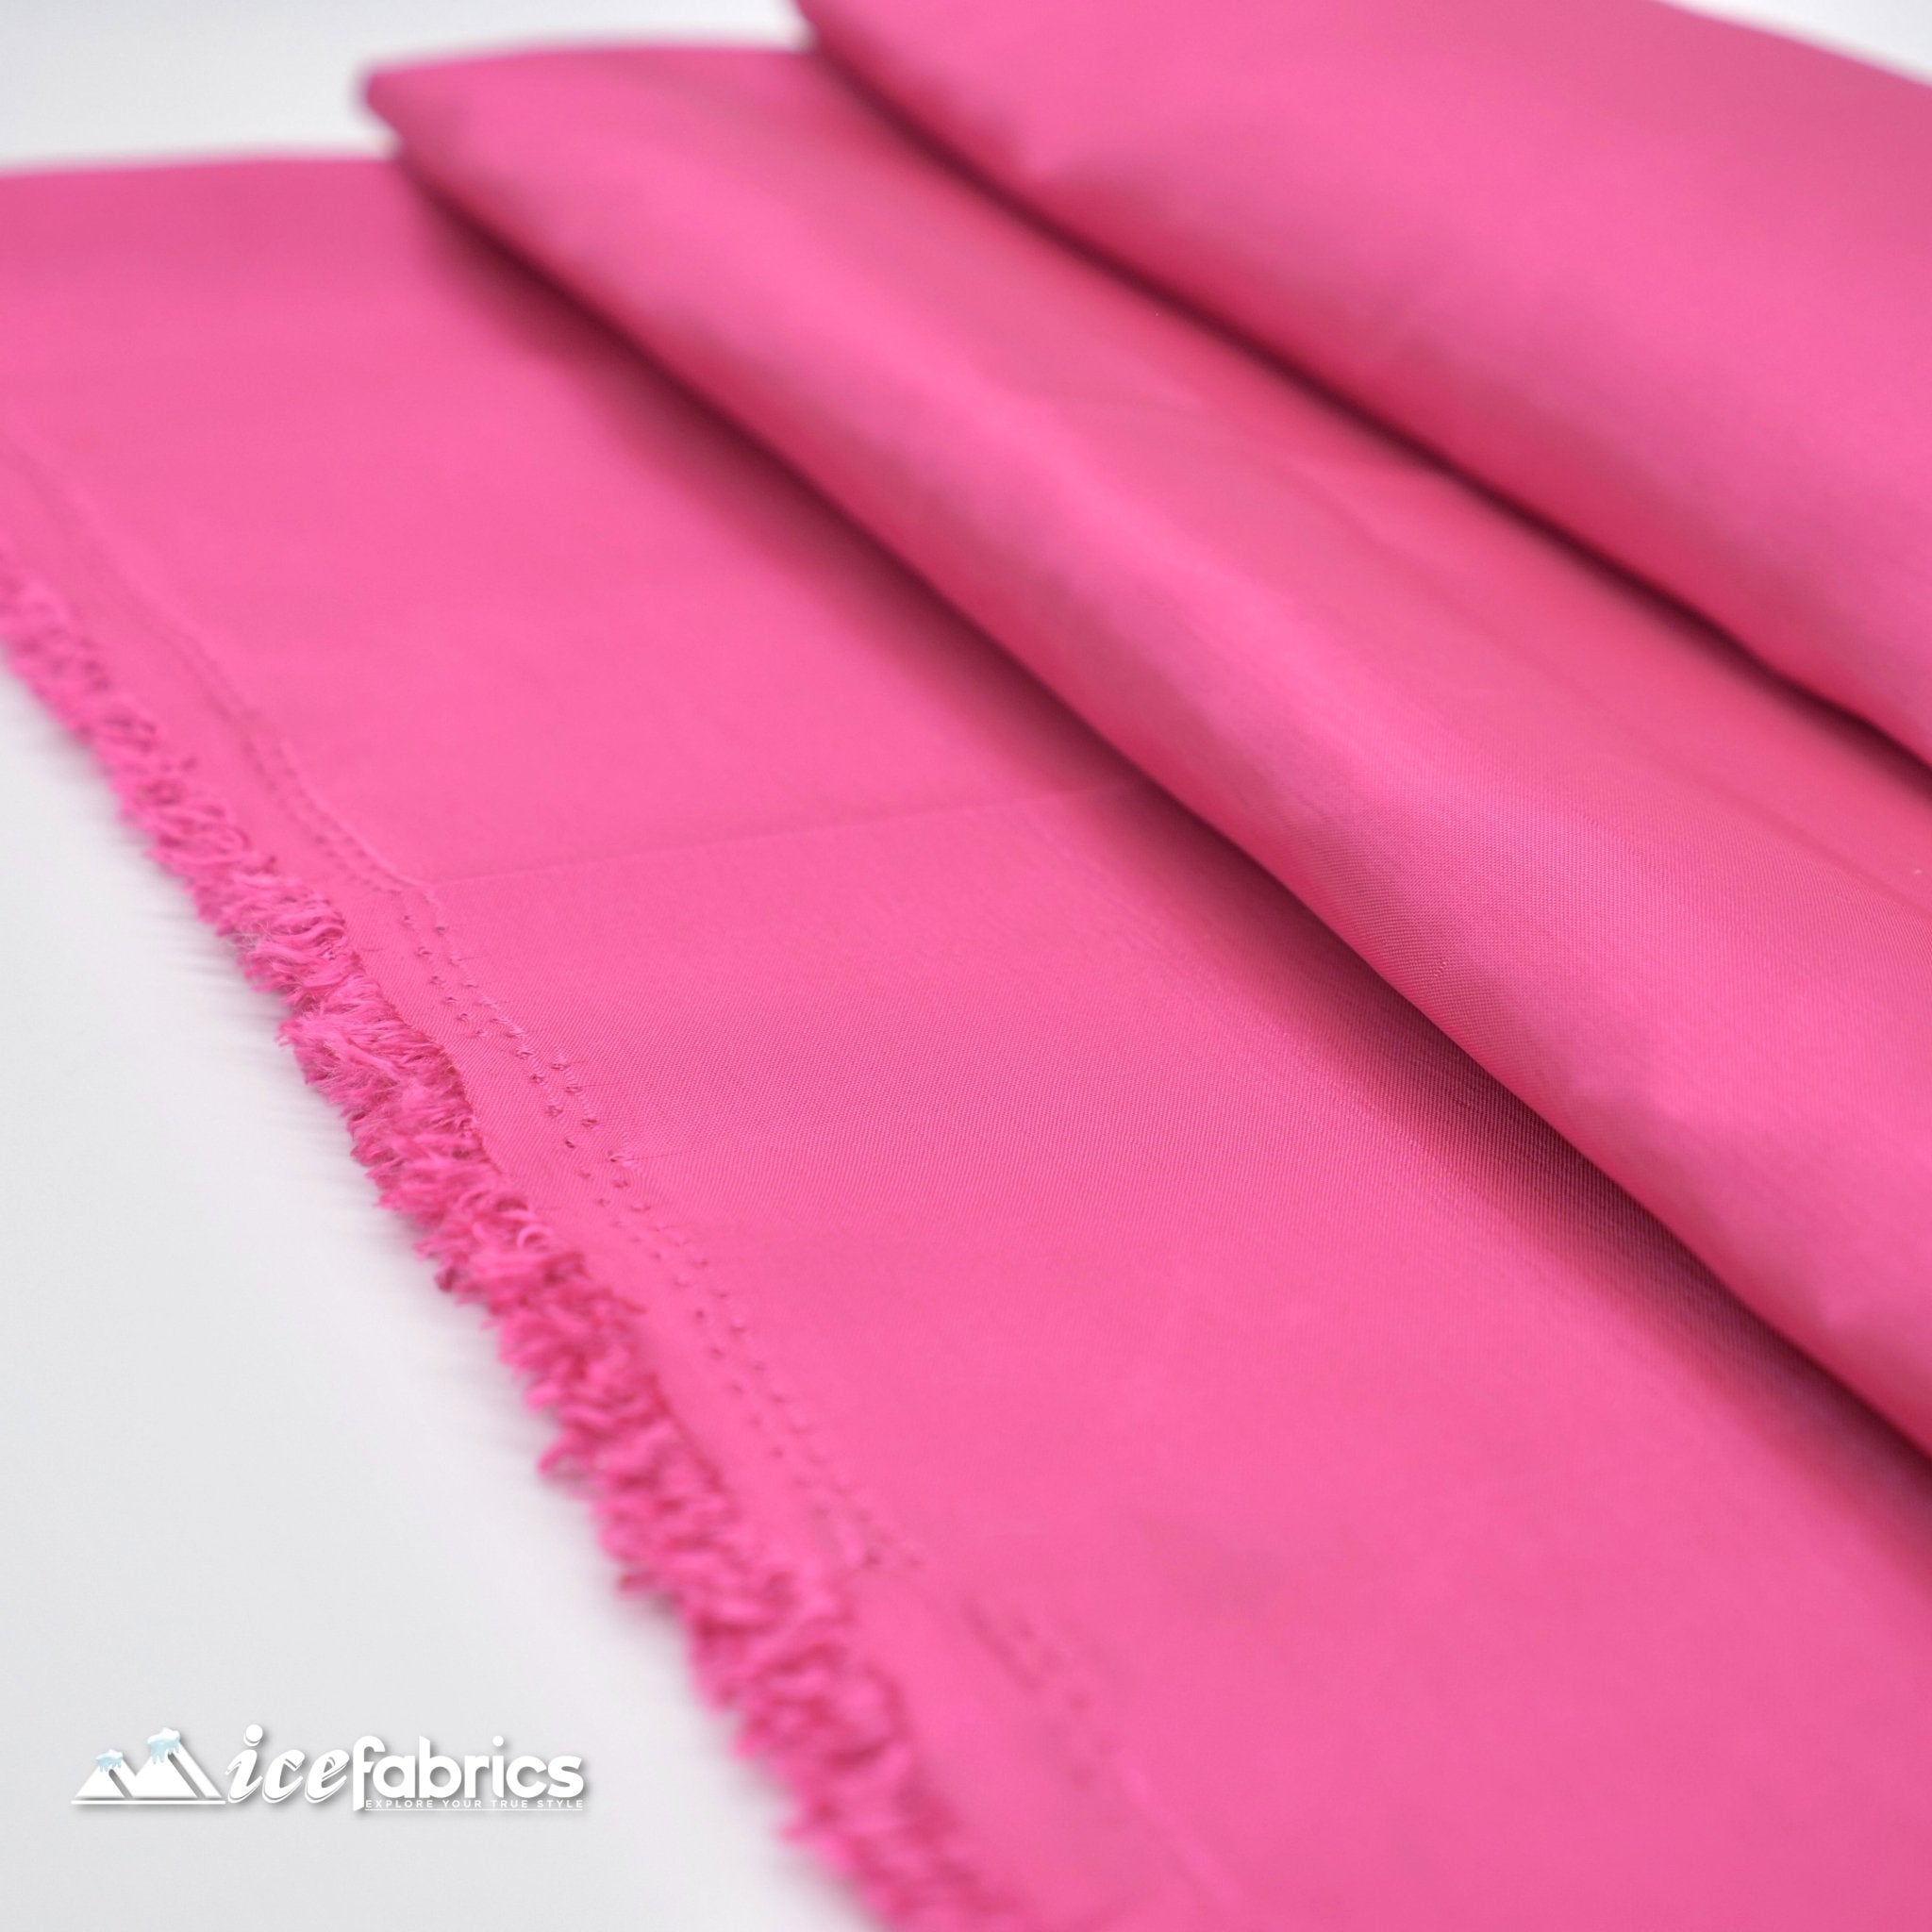 High Quality Solid Taffeta Fabric_ 60" Width_ By The YardTaffeta FabricICEFABRICICE FABRICSKelly GreenHigh Quality Solid Taffeta Fabric_ 60" Width_ By The YardTaffeta FabricICEFABRICICE FABRICSHot PinkHigh Quality Solid Taffeta Fabric_ 60" Width_ By The Yard ICEFABRIC Hot Pink